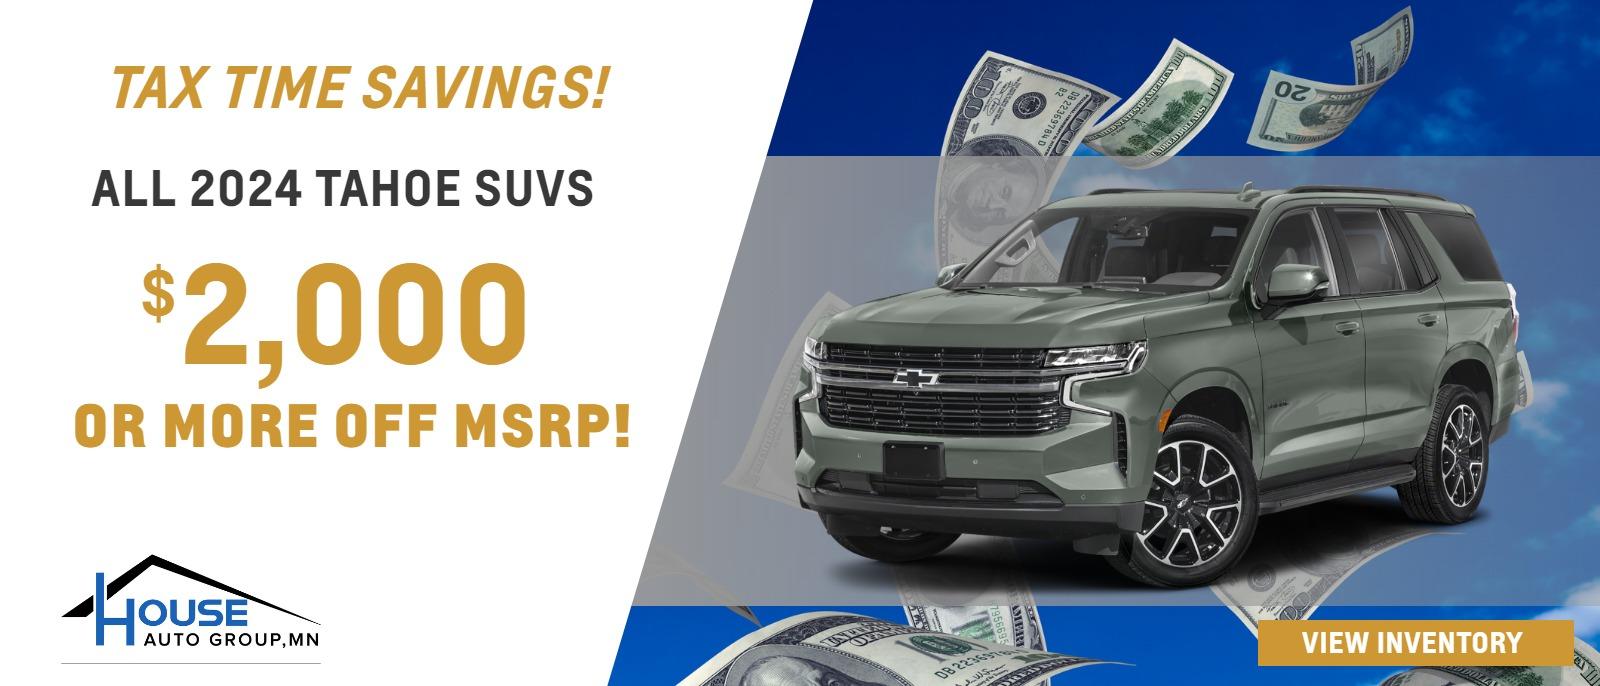 ALL 2024 Tahoe SUVs - $2,000 Or More Off MSRP!